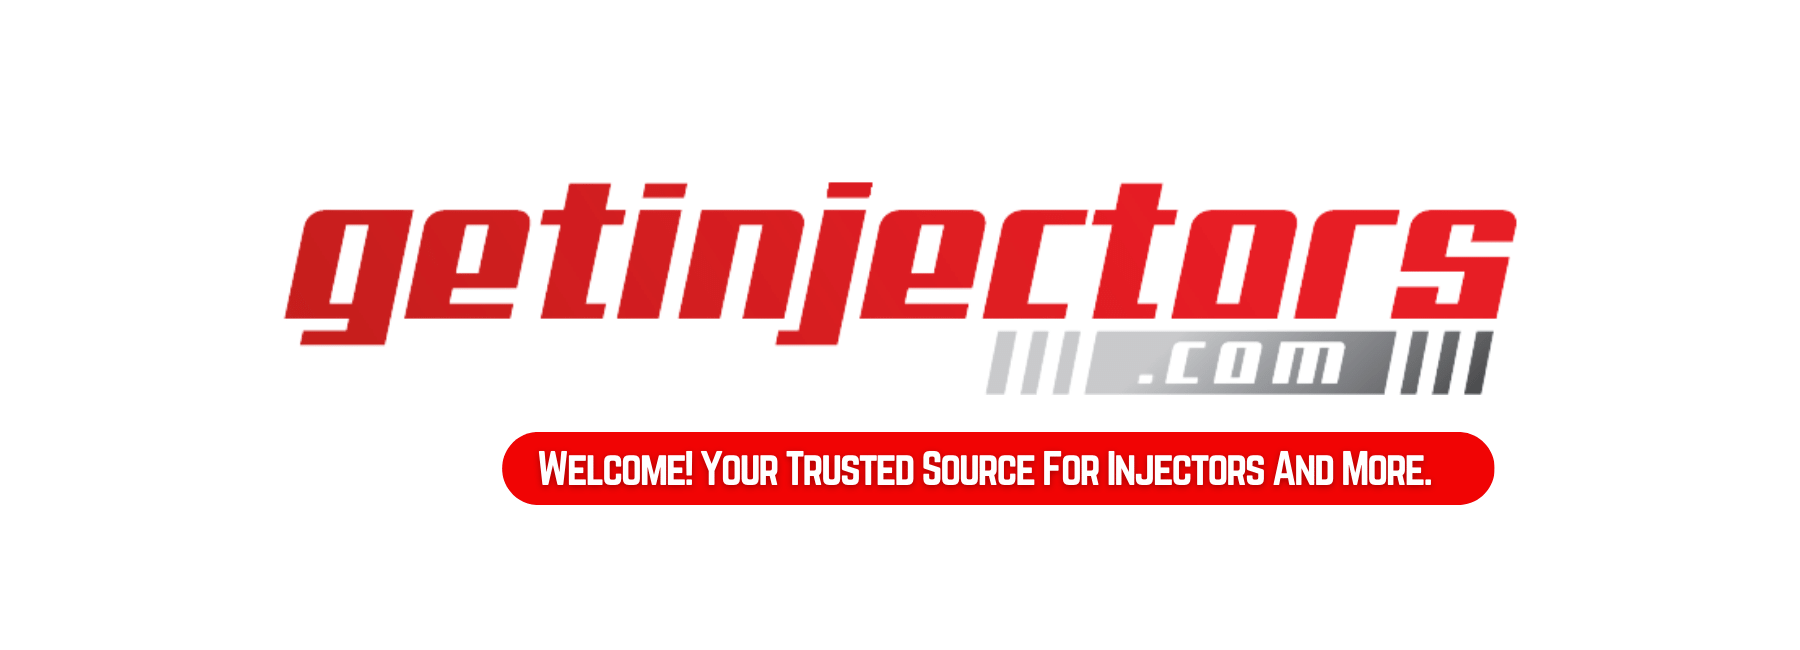 GetInjectors.com. Showcase of various diesel fuel injectors available for purchase.